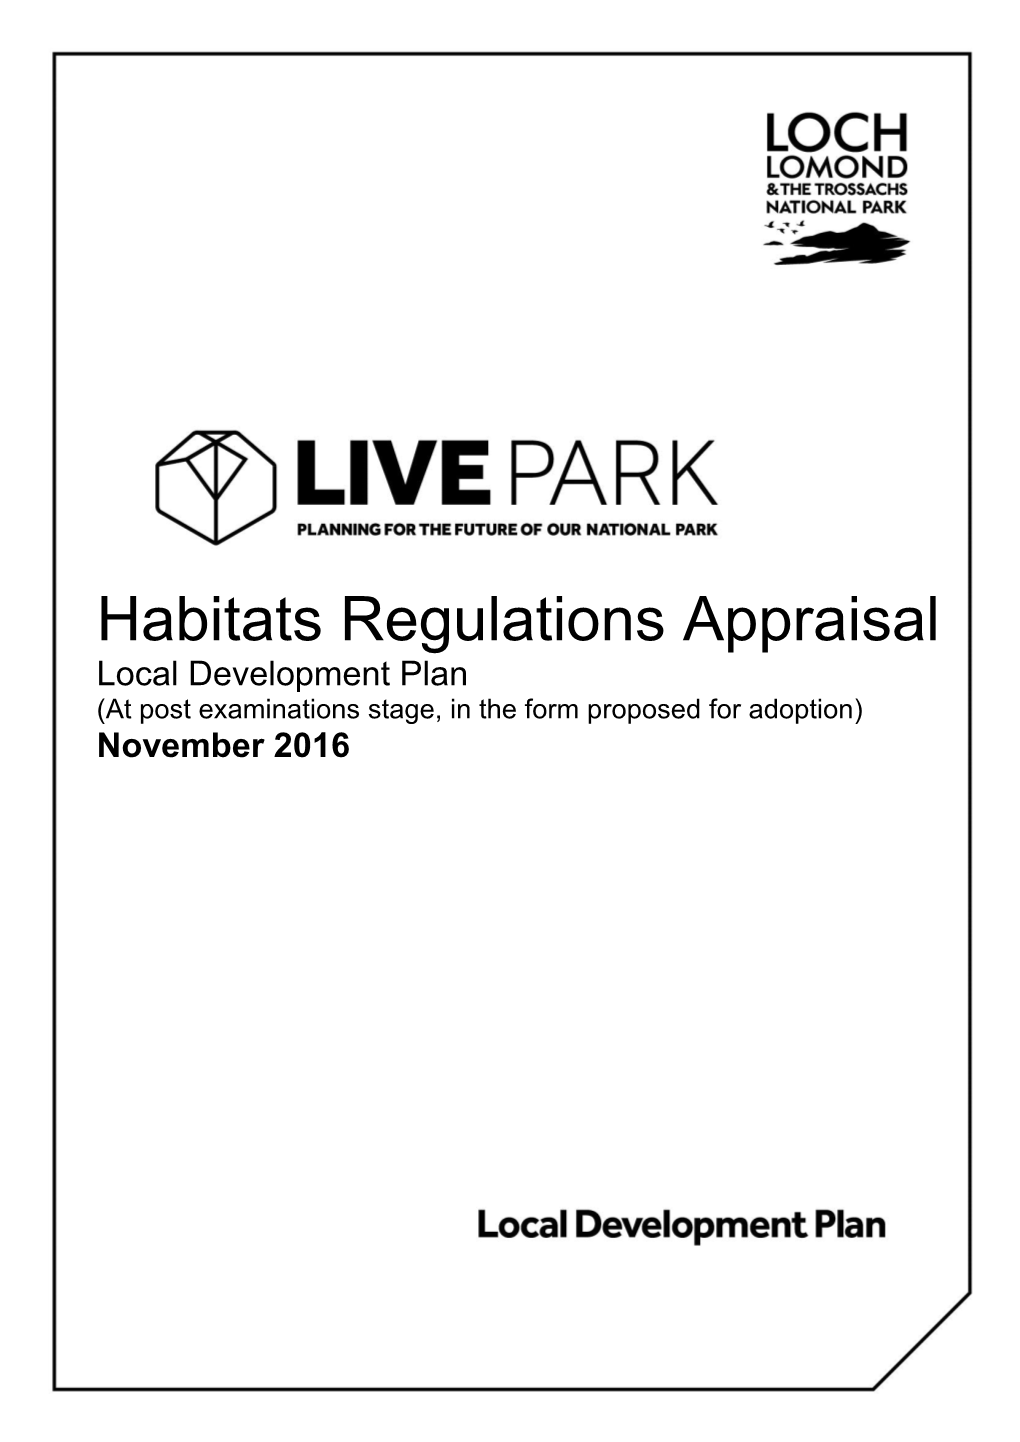 Habitats Regulations Appraisal Local Development Plan (At Post Examinations Stage, in the Form Proposed for Adoption) November 2016